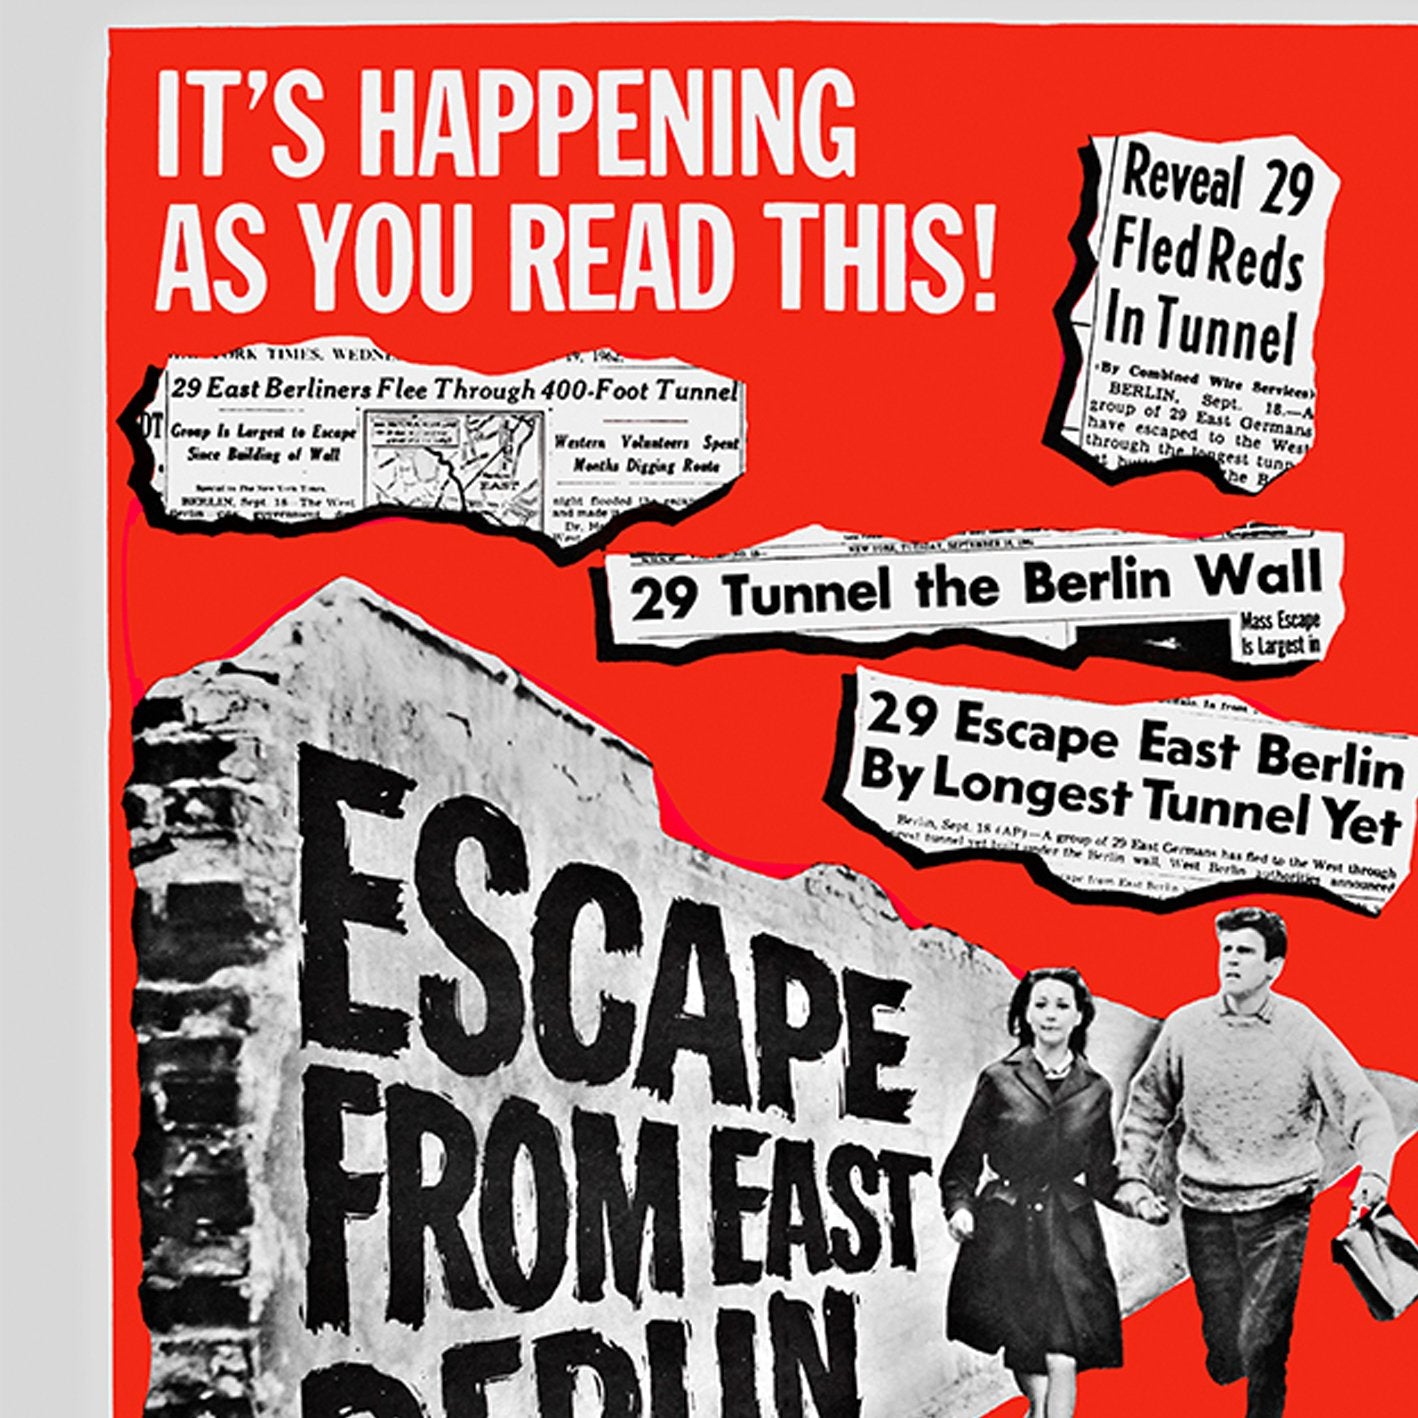 Escape from East Berlin Retro Movie Poster